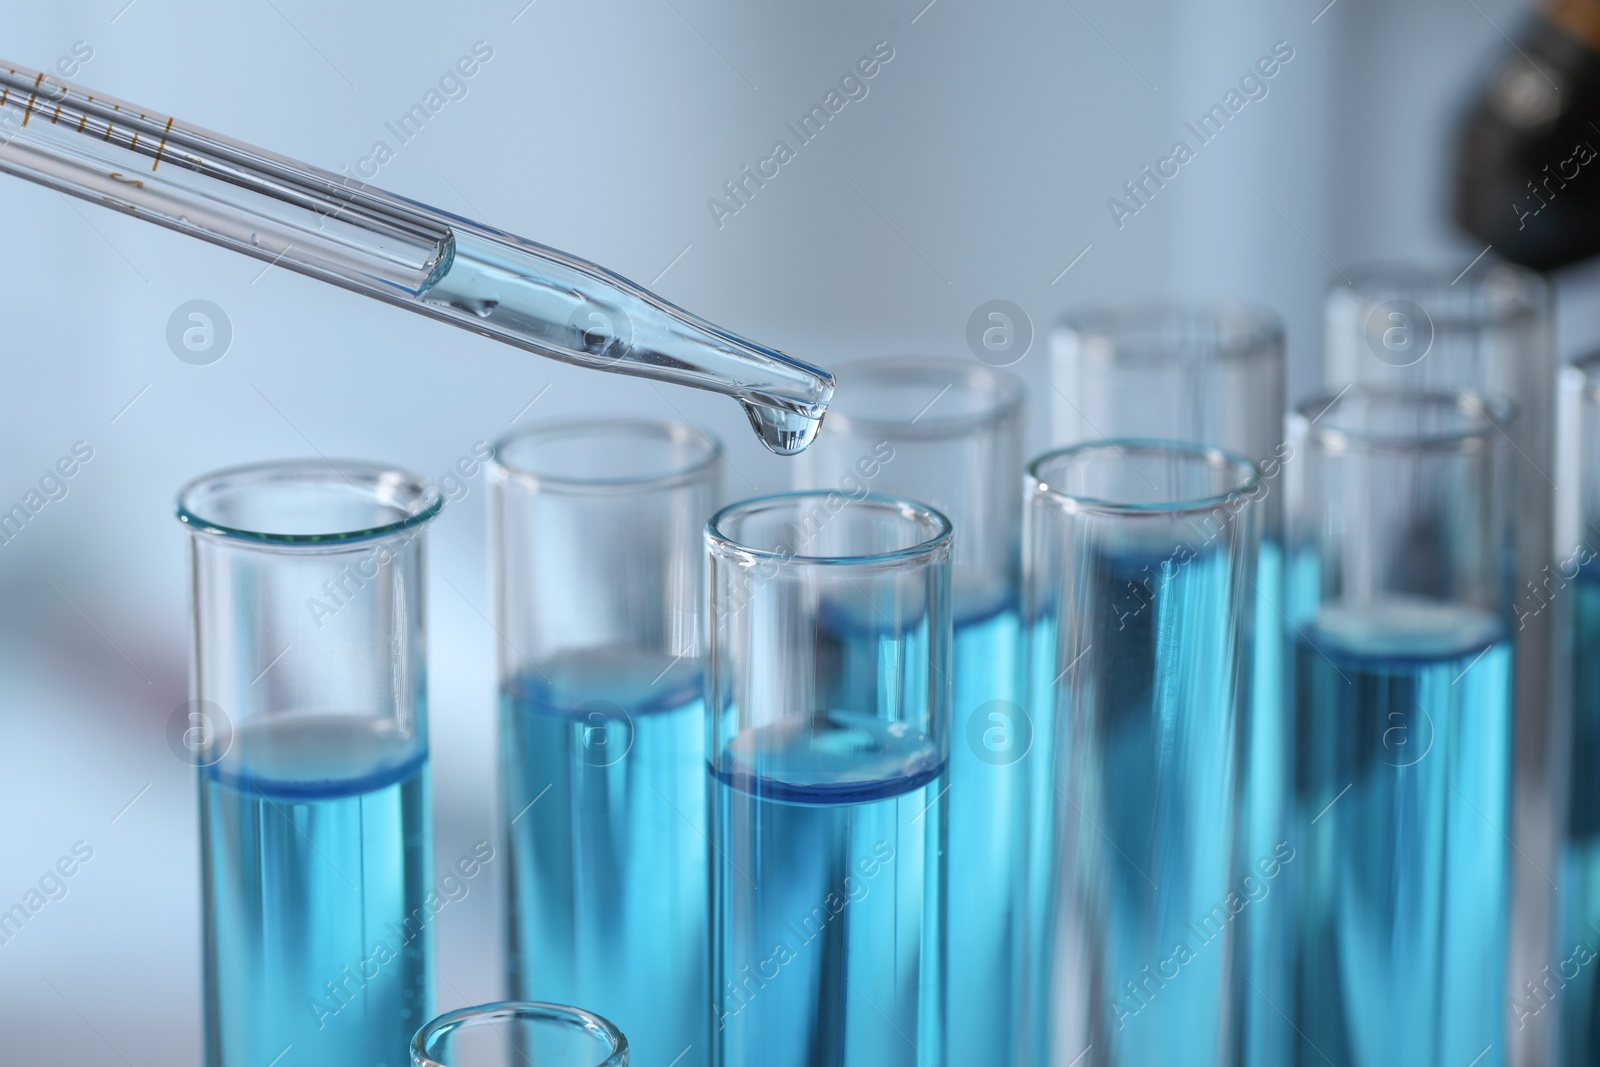 Photo of Dripping liquid from pipette into test tube in laboratory, closeup